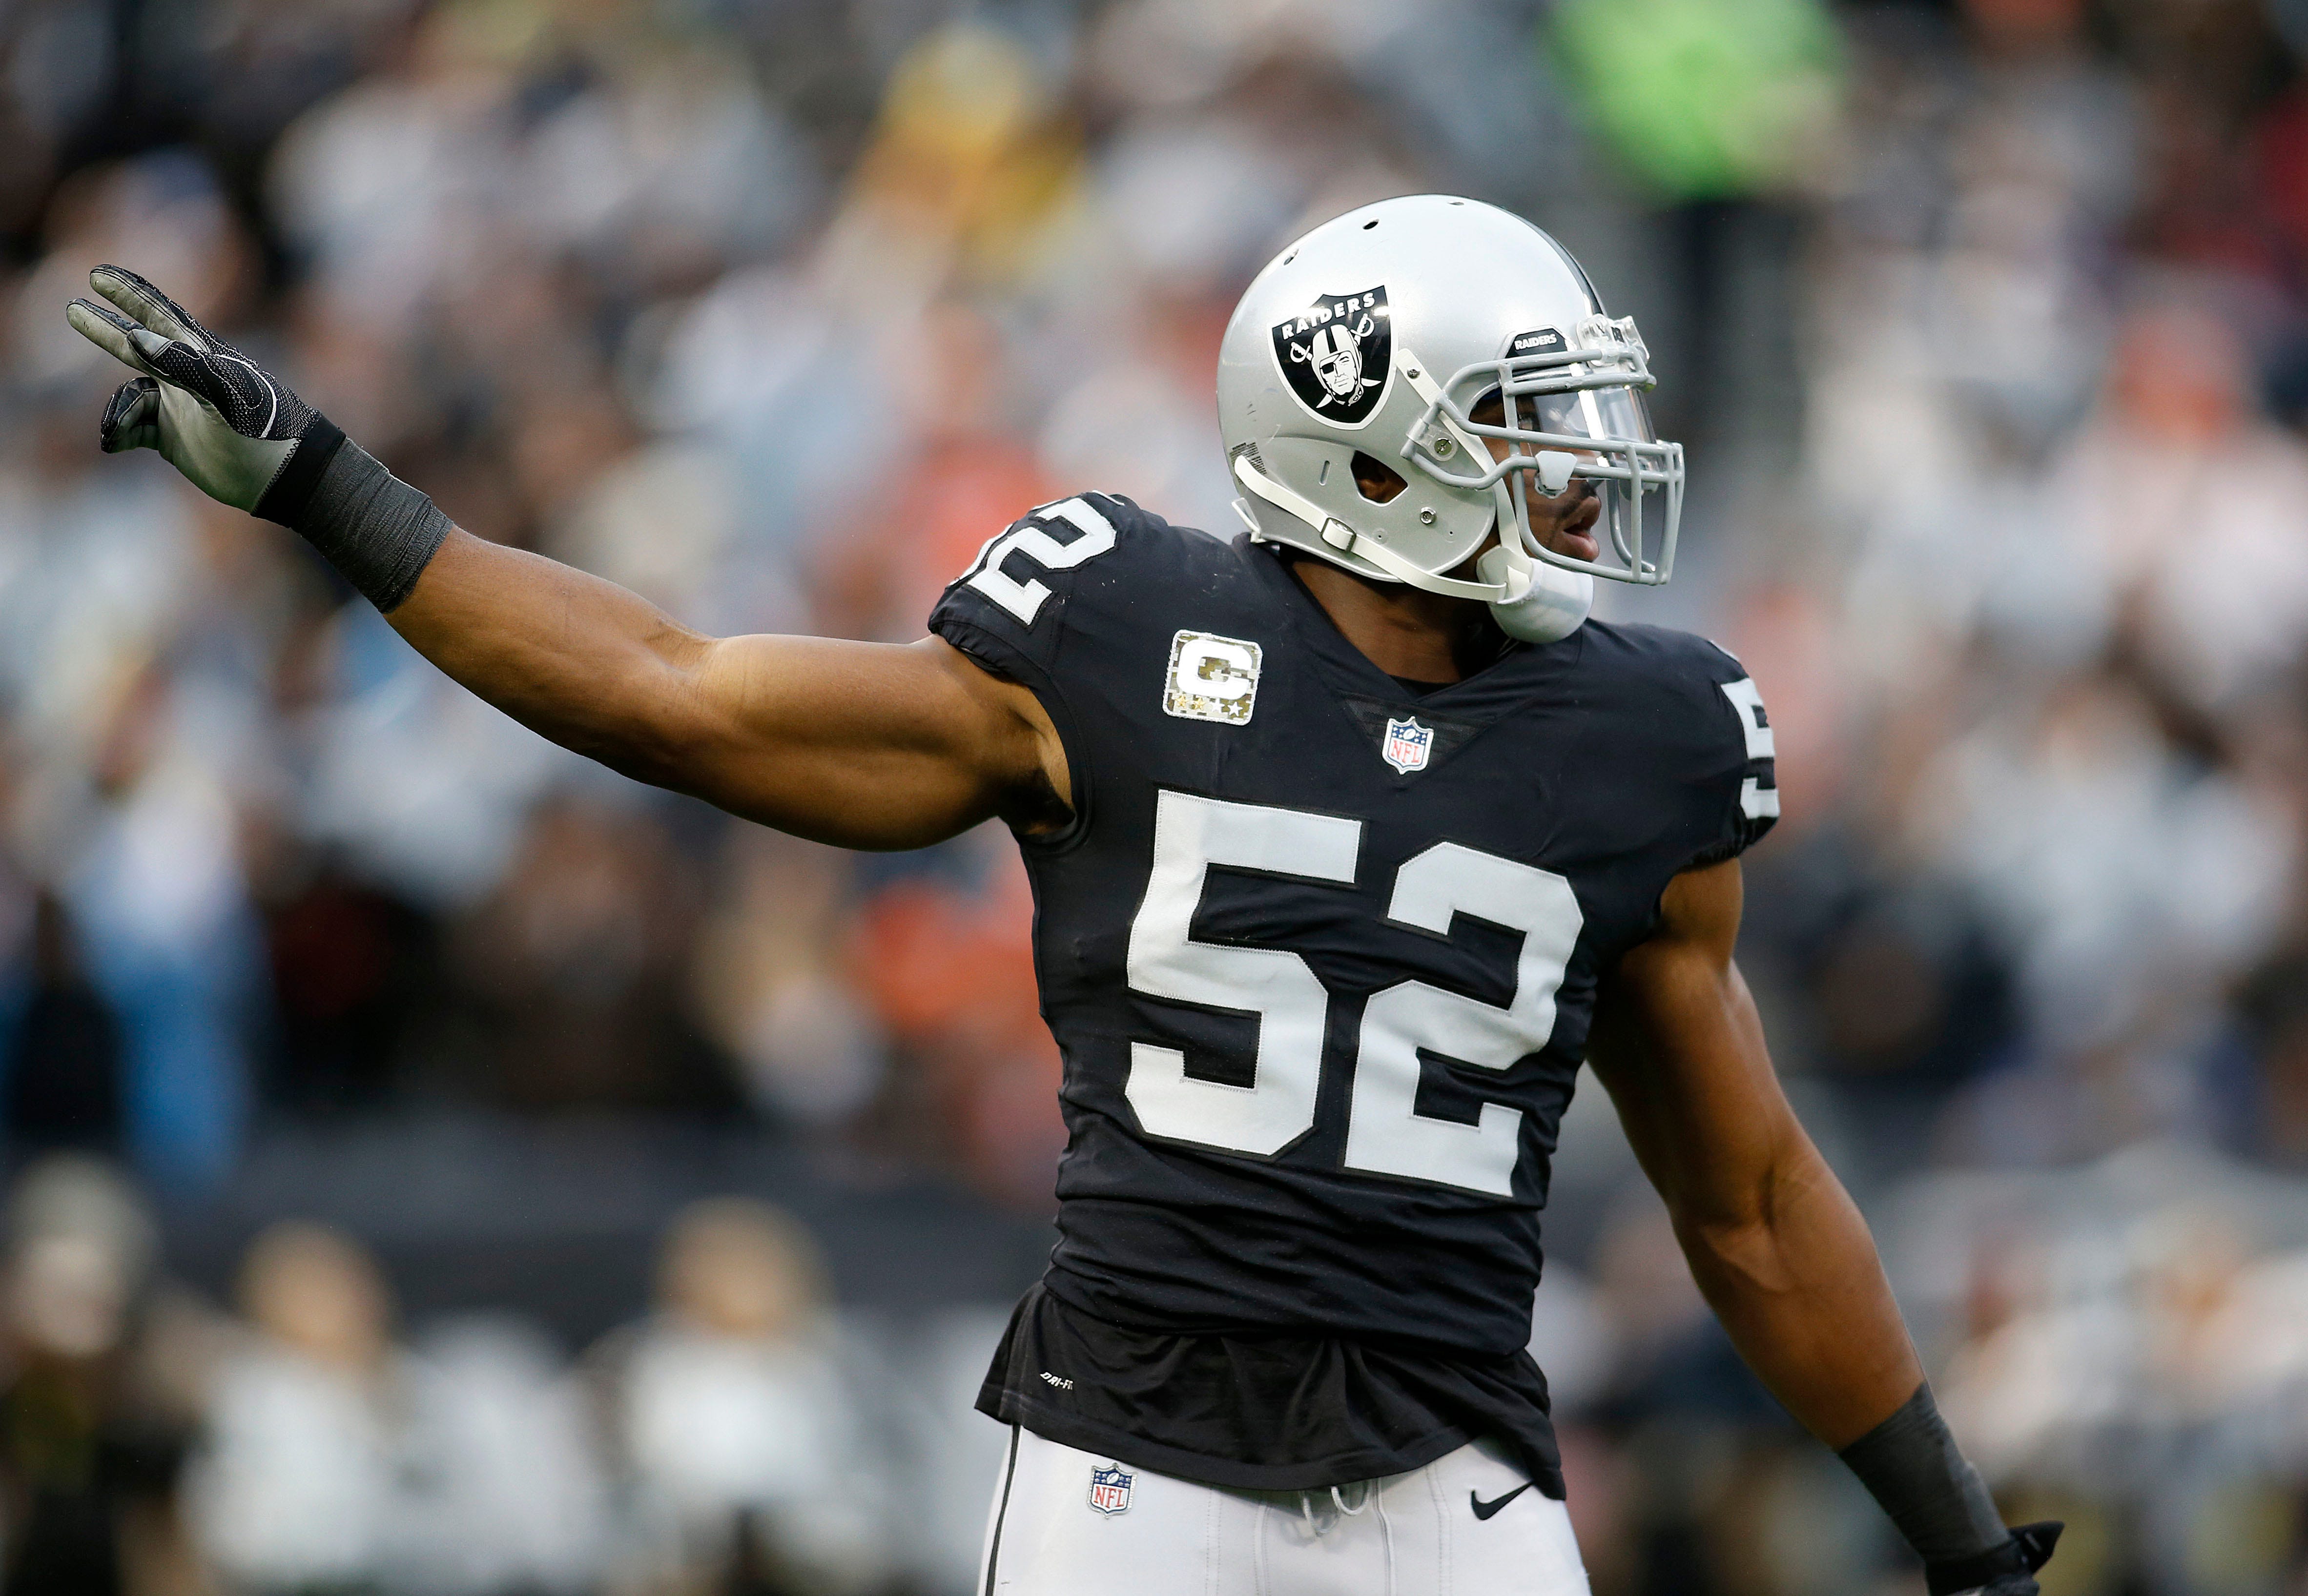 Oakland Raiders defensive end Khalil Mack (52) gestures during the first half of an NFL football game against the Denver Broncos in Oakland, Calif., Sunday, Nov. 26, 2017. (AP Photo/D. Ross Cameron)